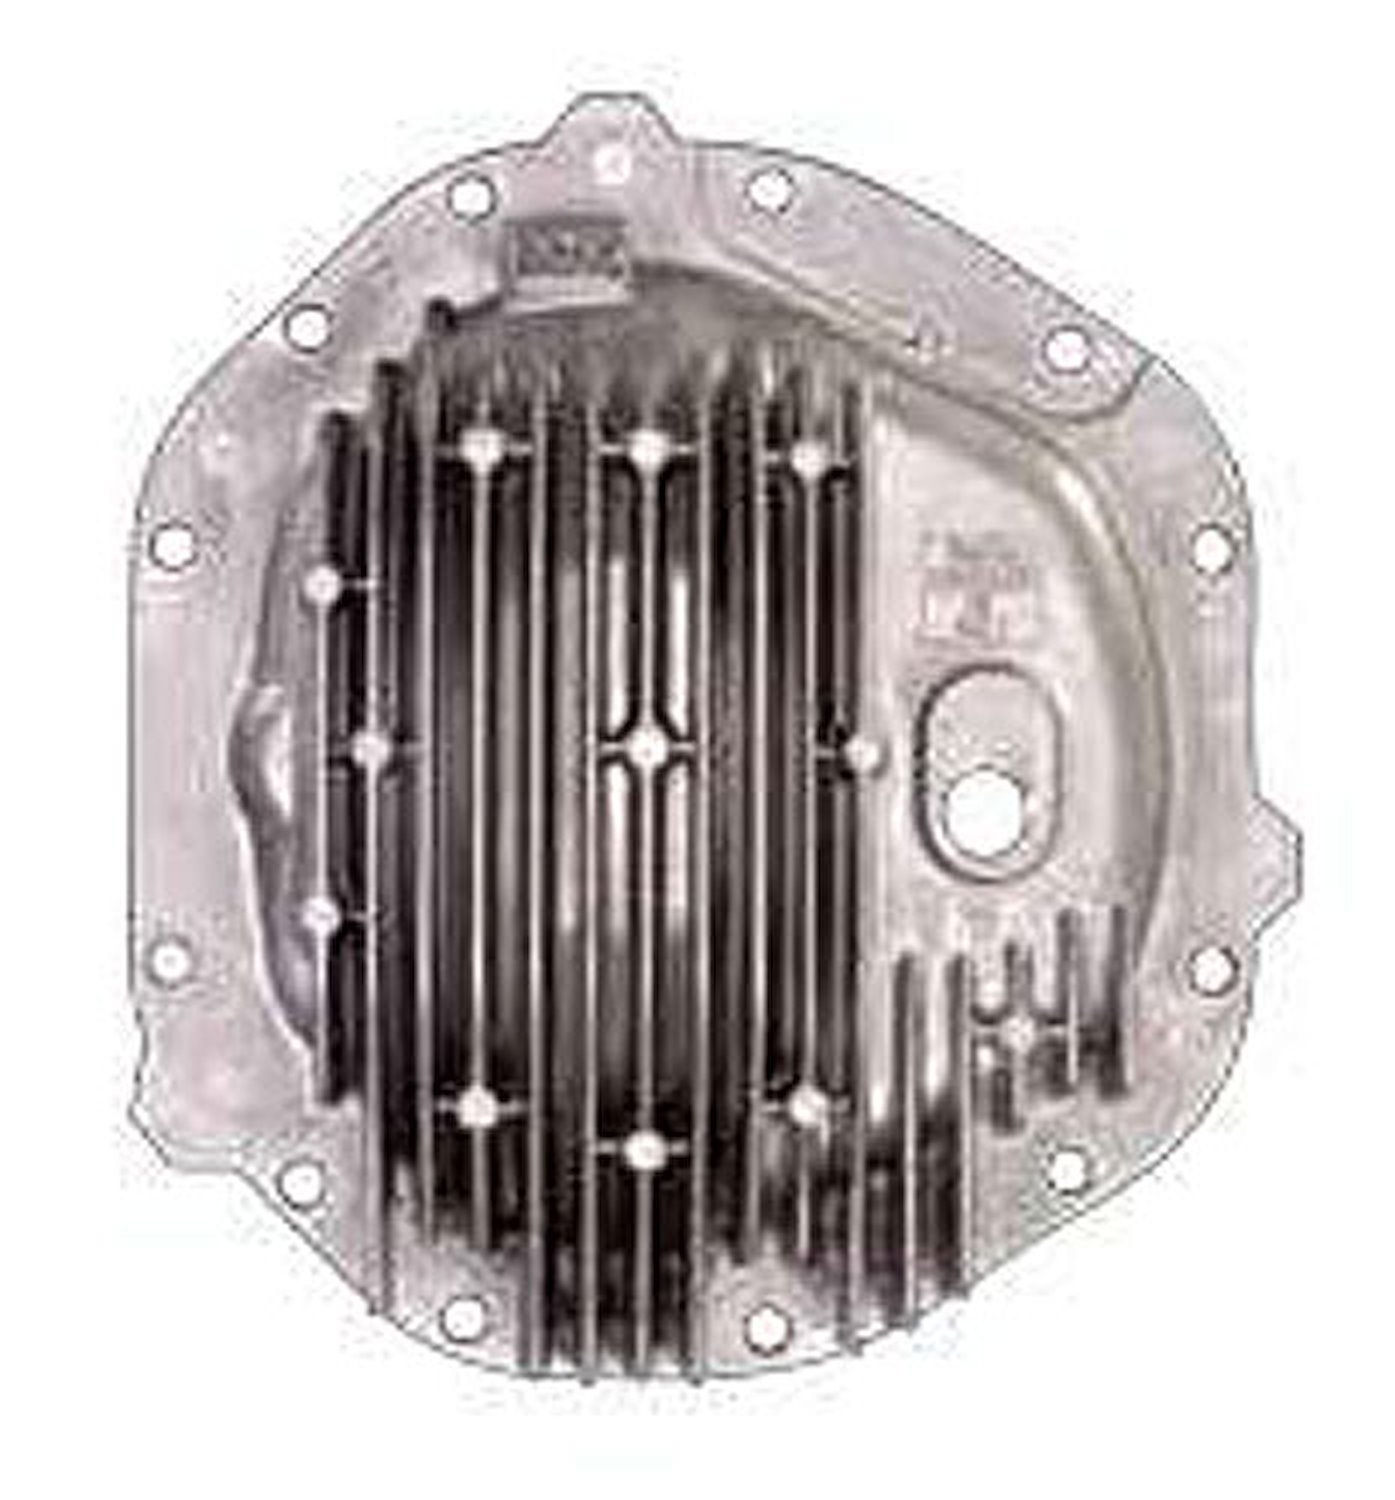 Finned Aluminum Differential Cover Fits Dana 80 Axle